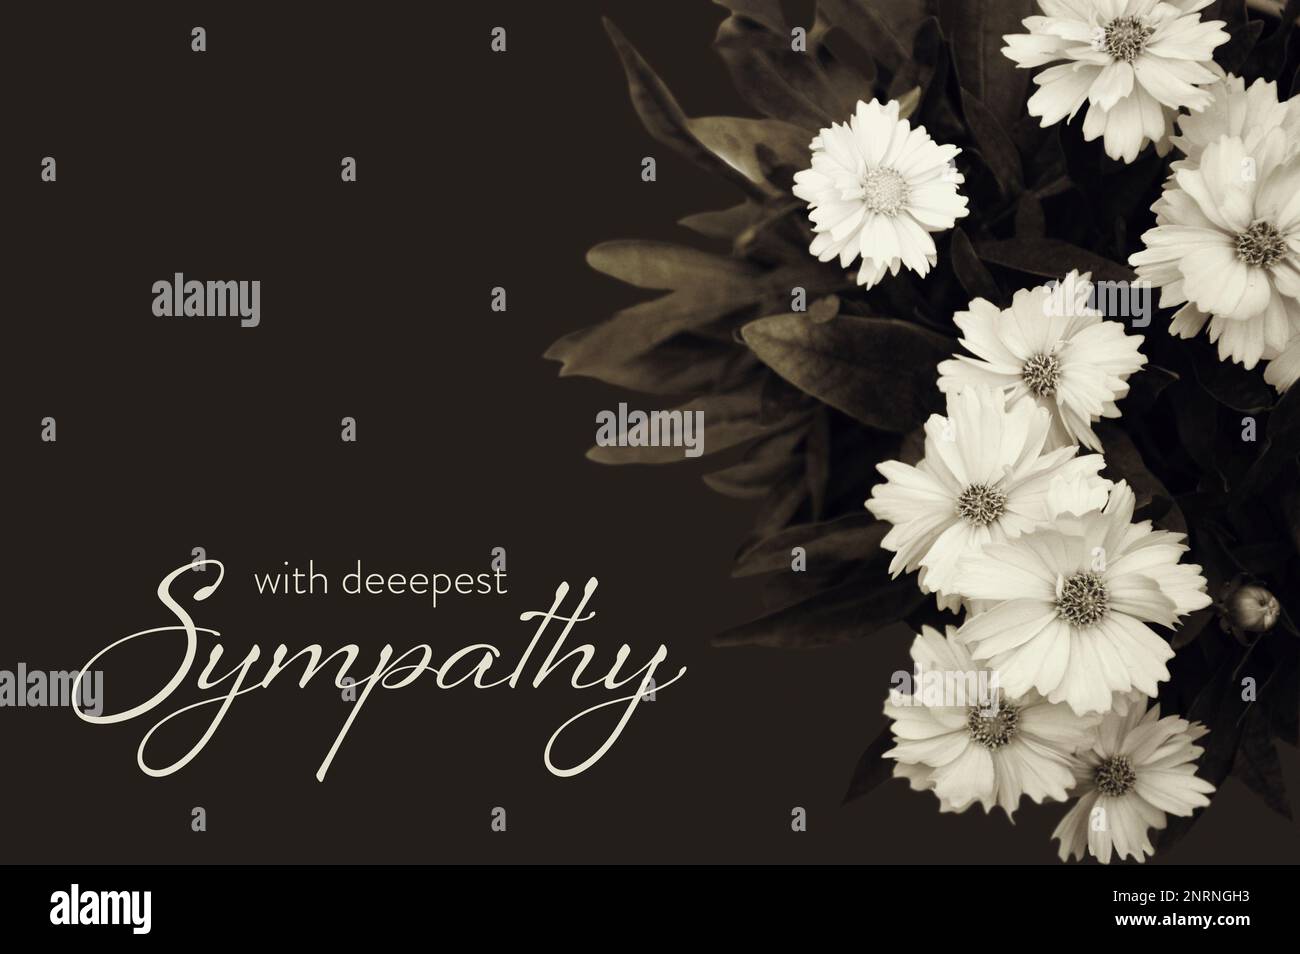 Sympathy card with bunch of white flowers on dark background Stock Photo